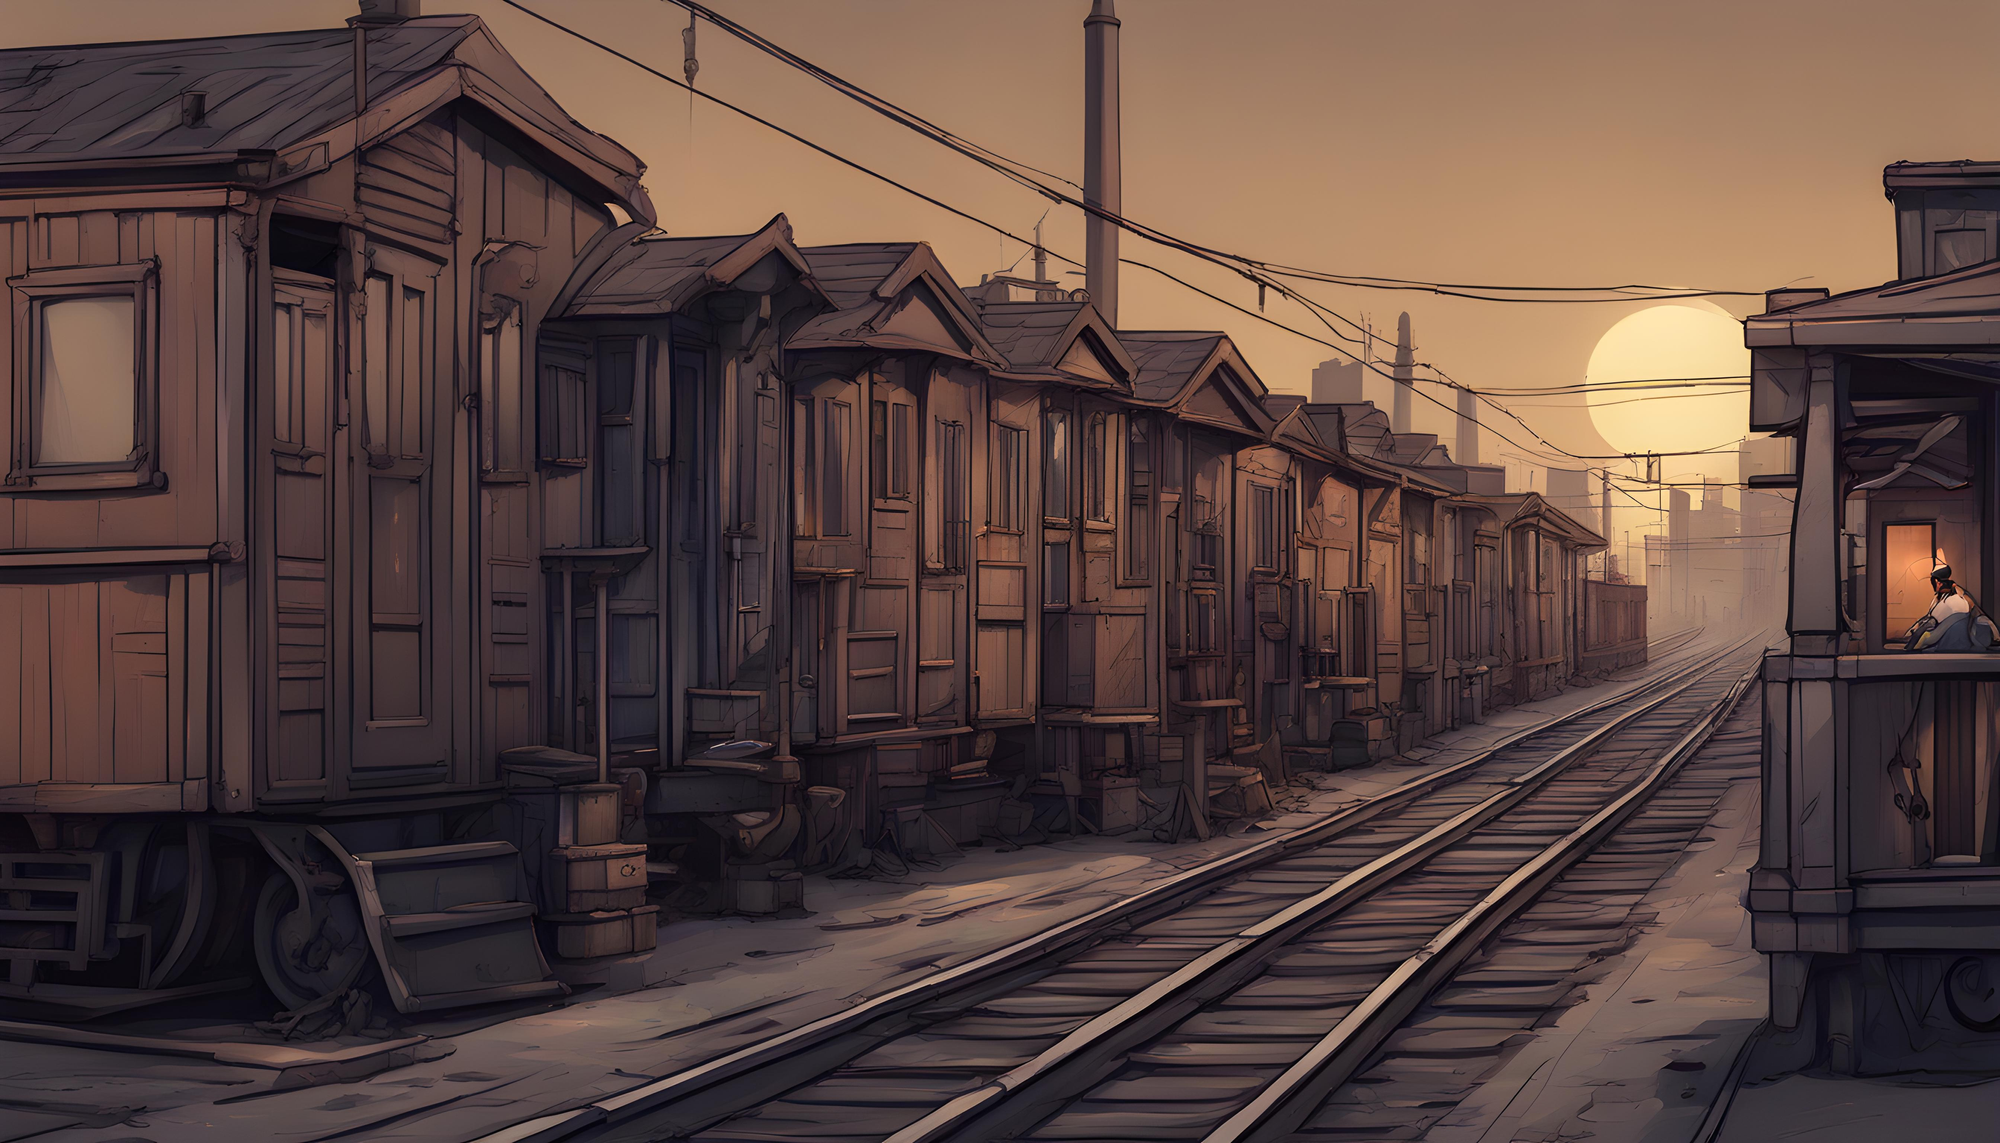 An alternative for housing, some people live in the abandoned train cars.